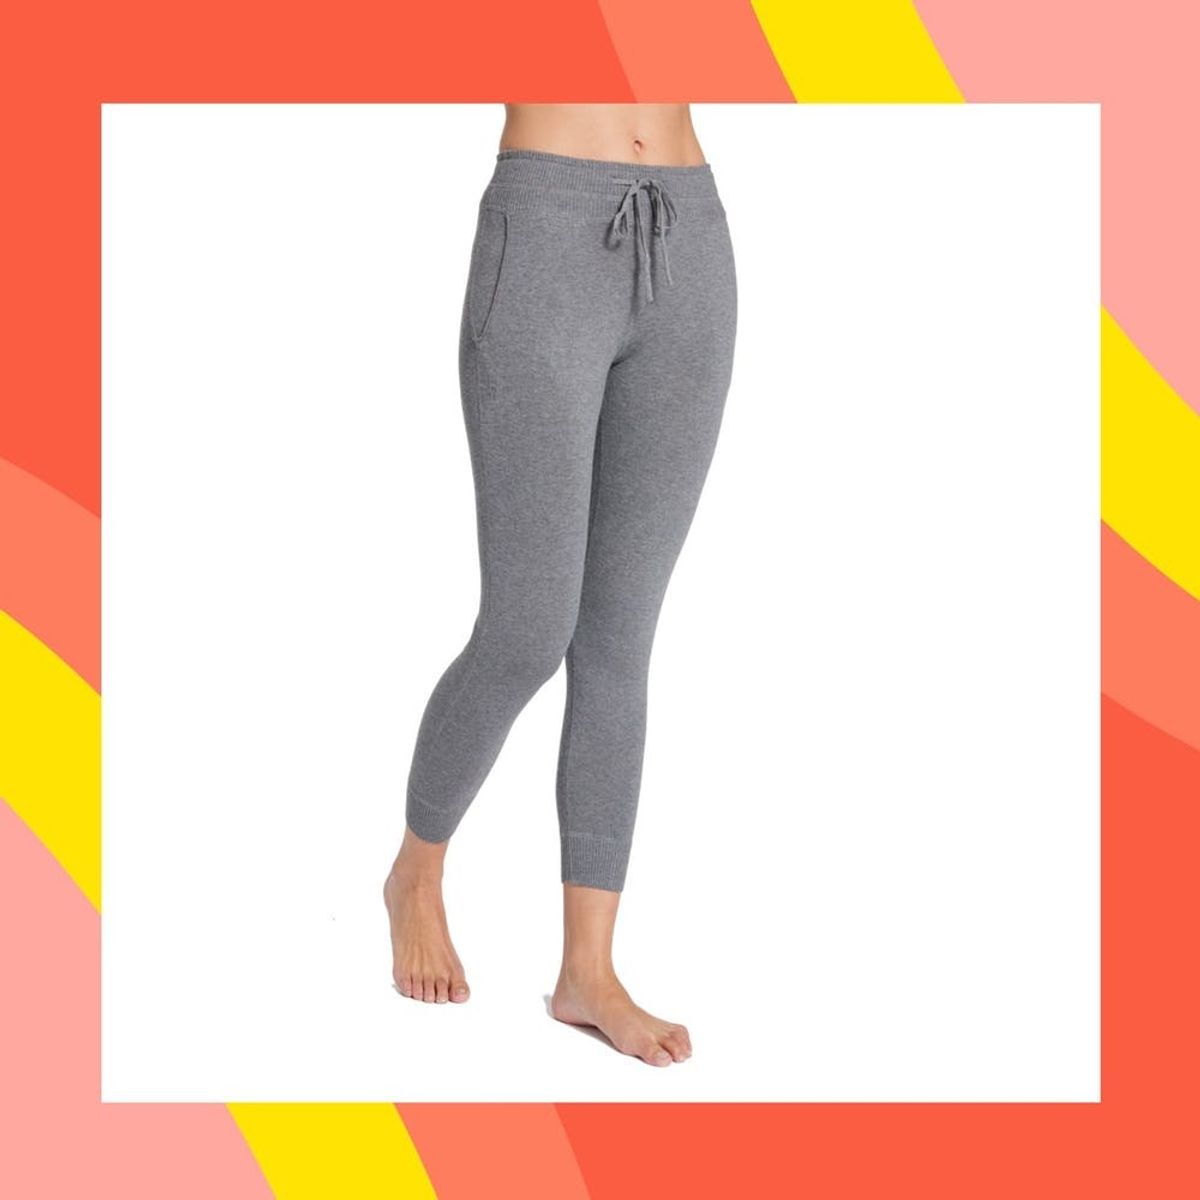 Hurry! Leimere Is Giving Away Cashmere Leggings for Free